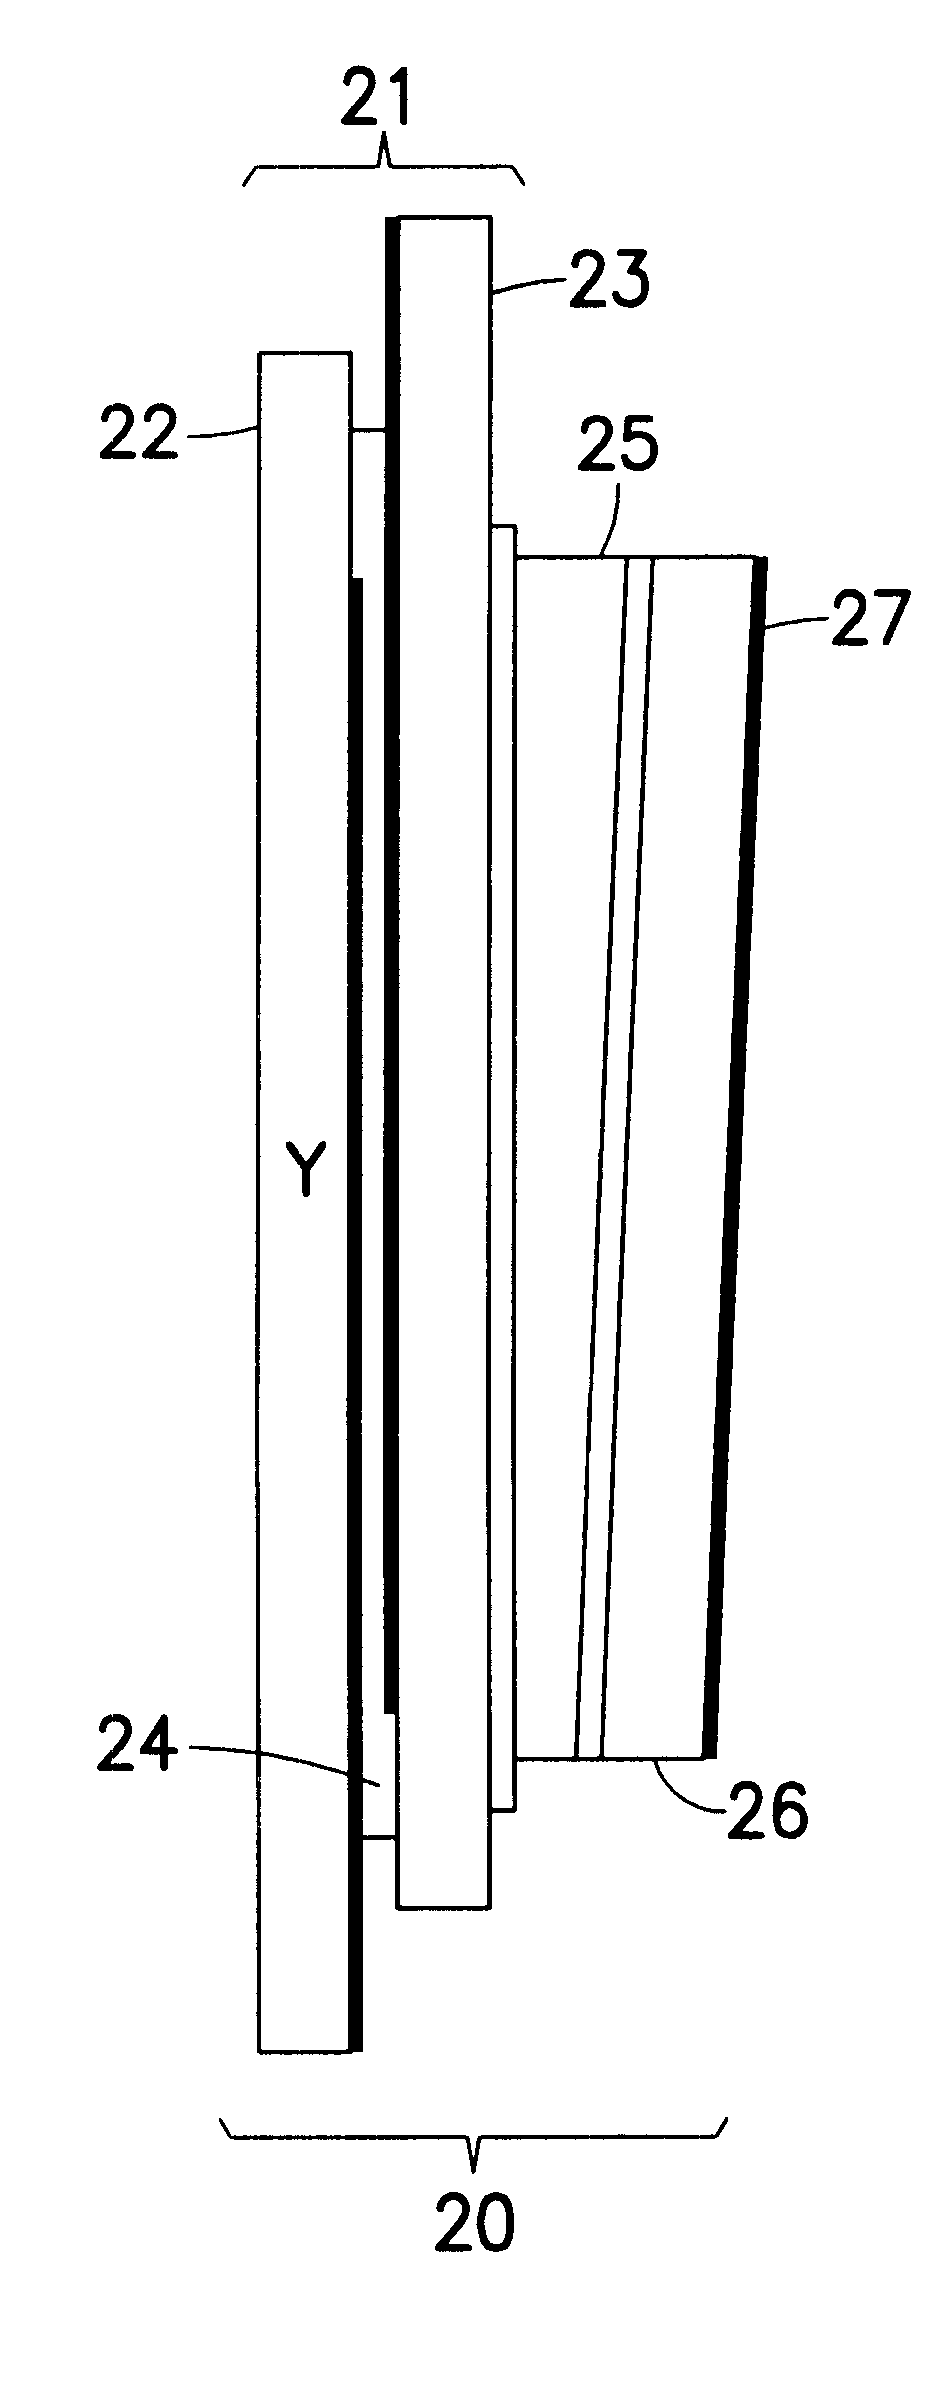 Liquid crystal cell for use in coherent beams